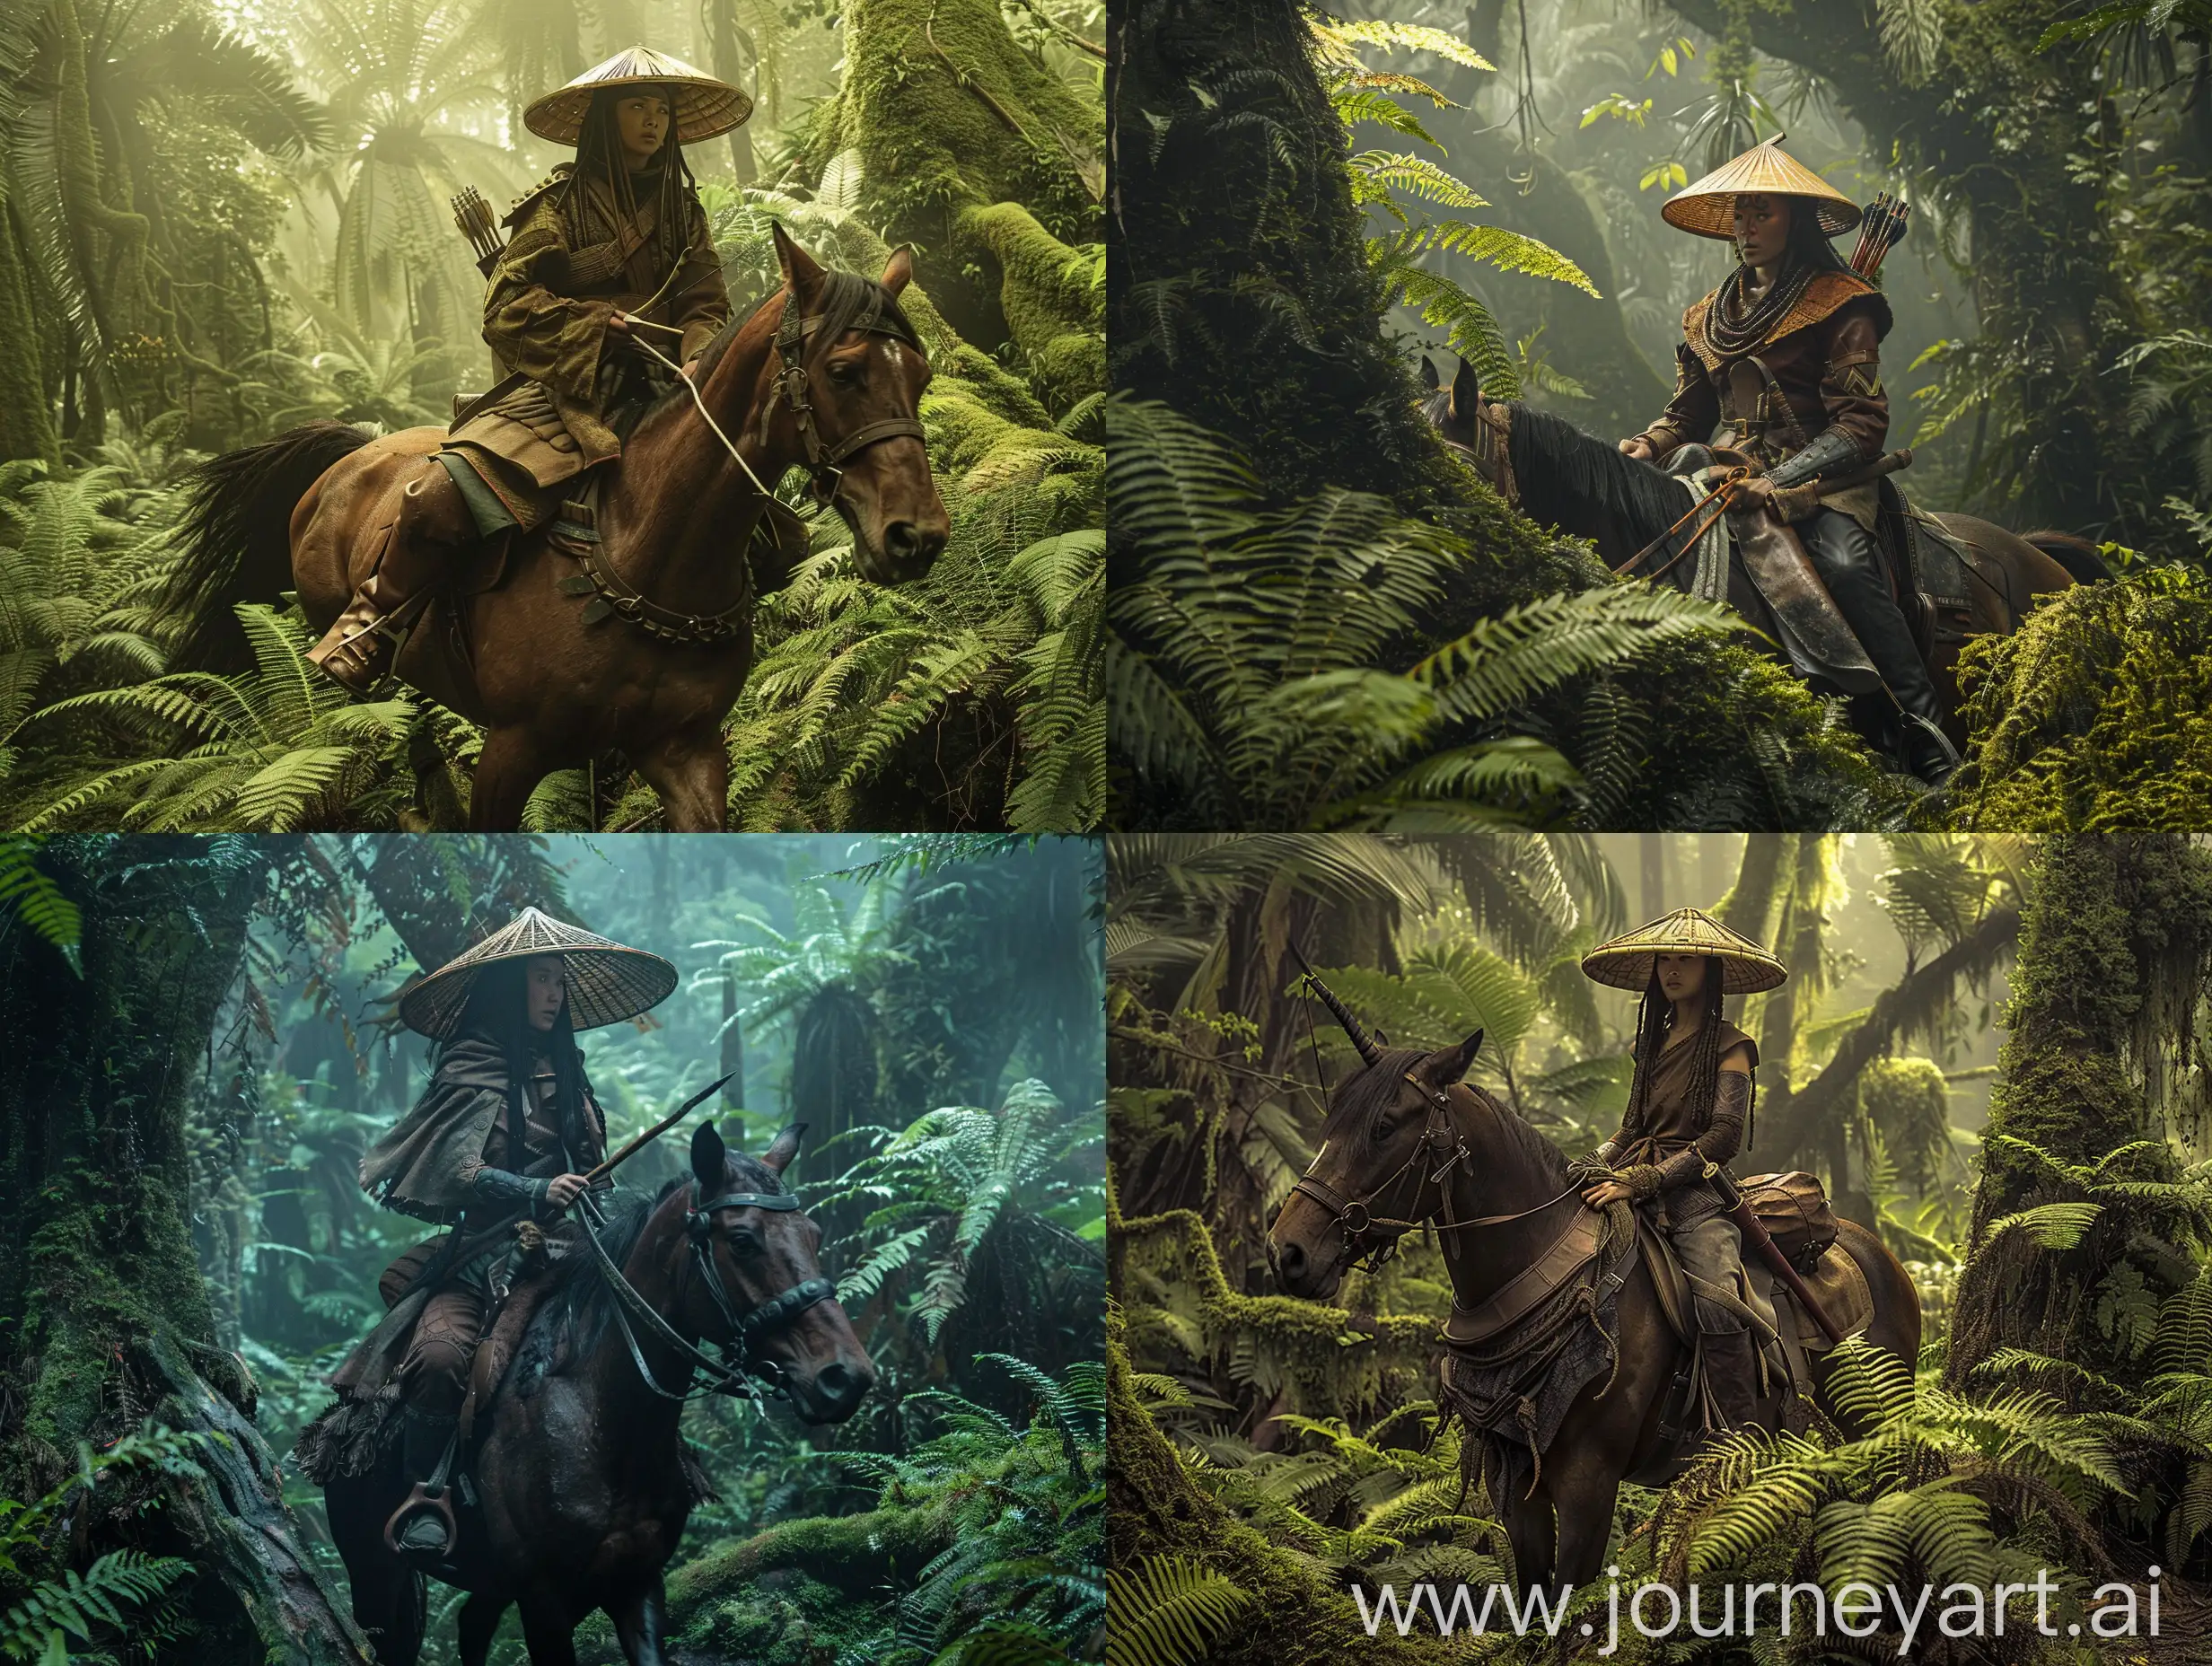 Majapahit-Female-Warrior-Riding-Horse-in-Enchanted-Forest